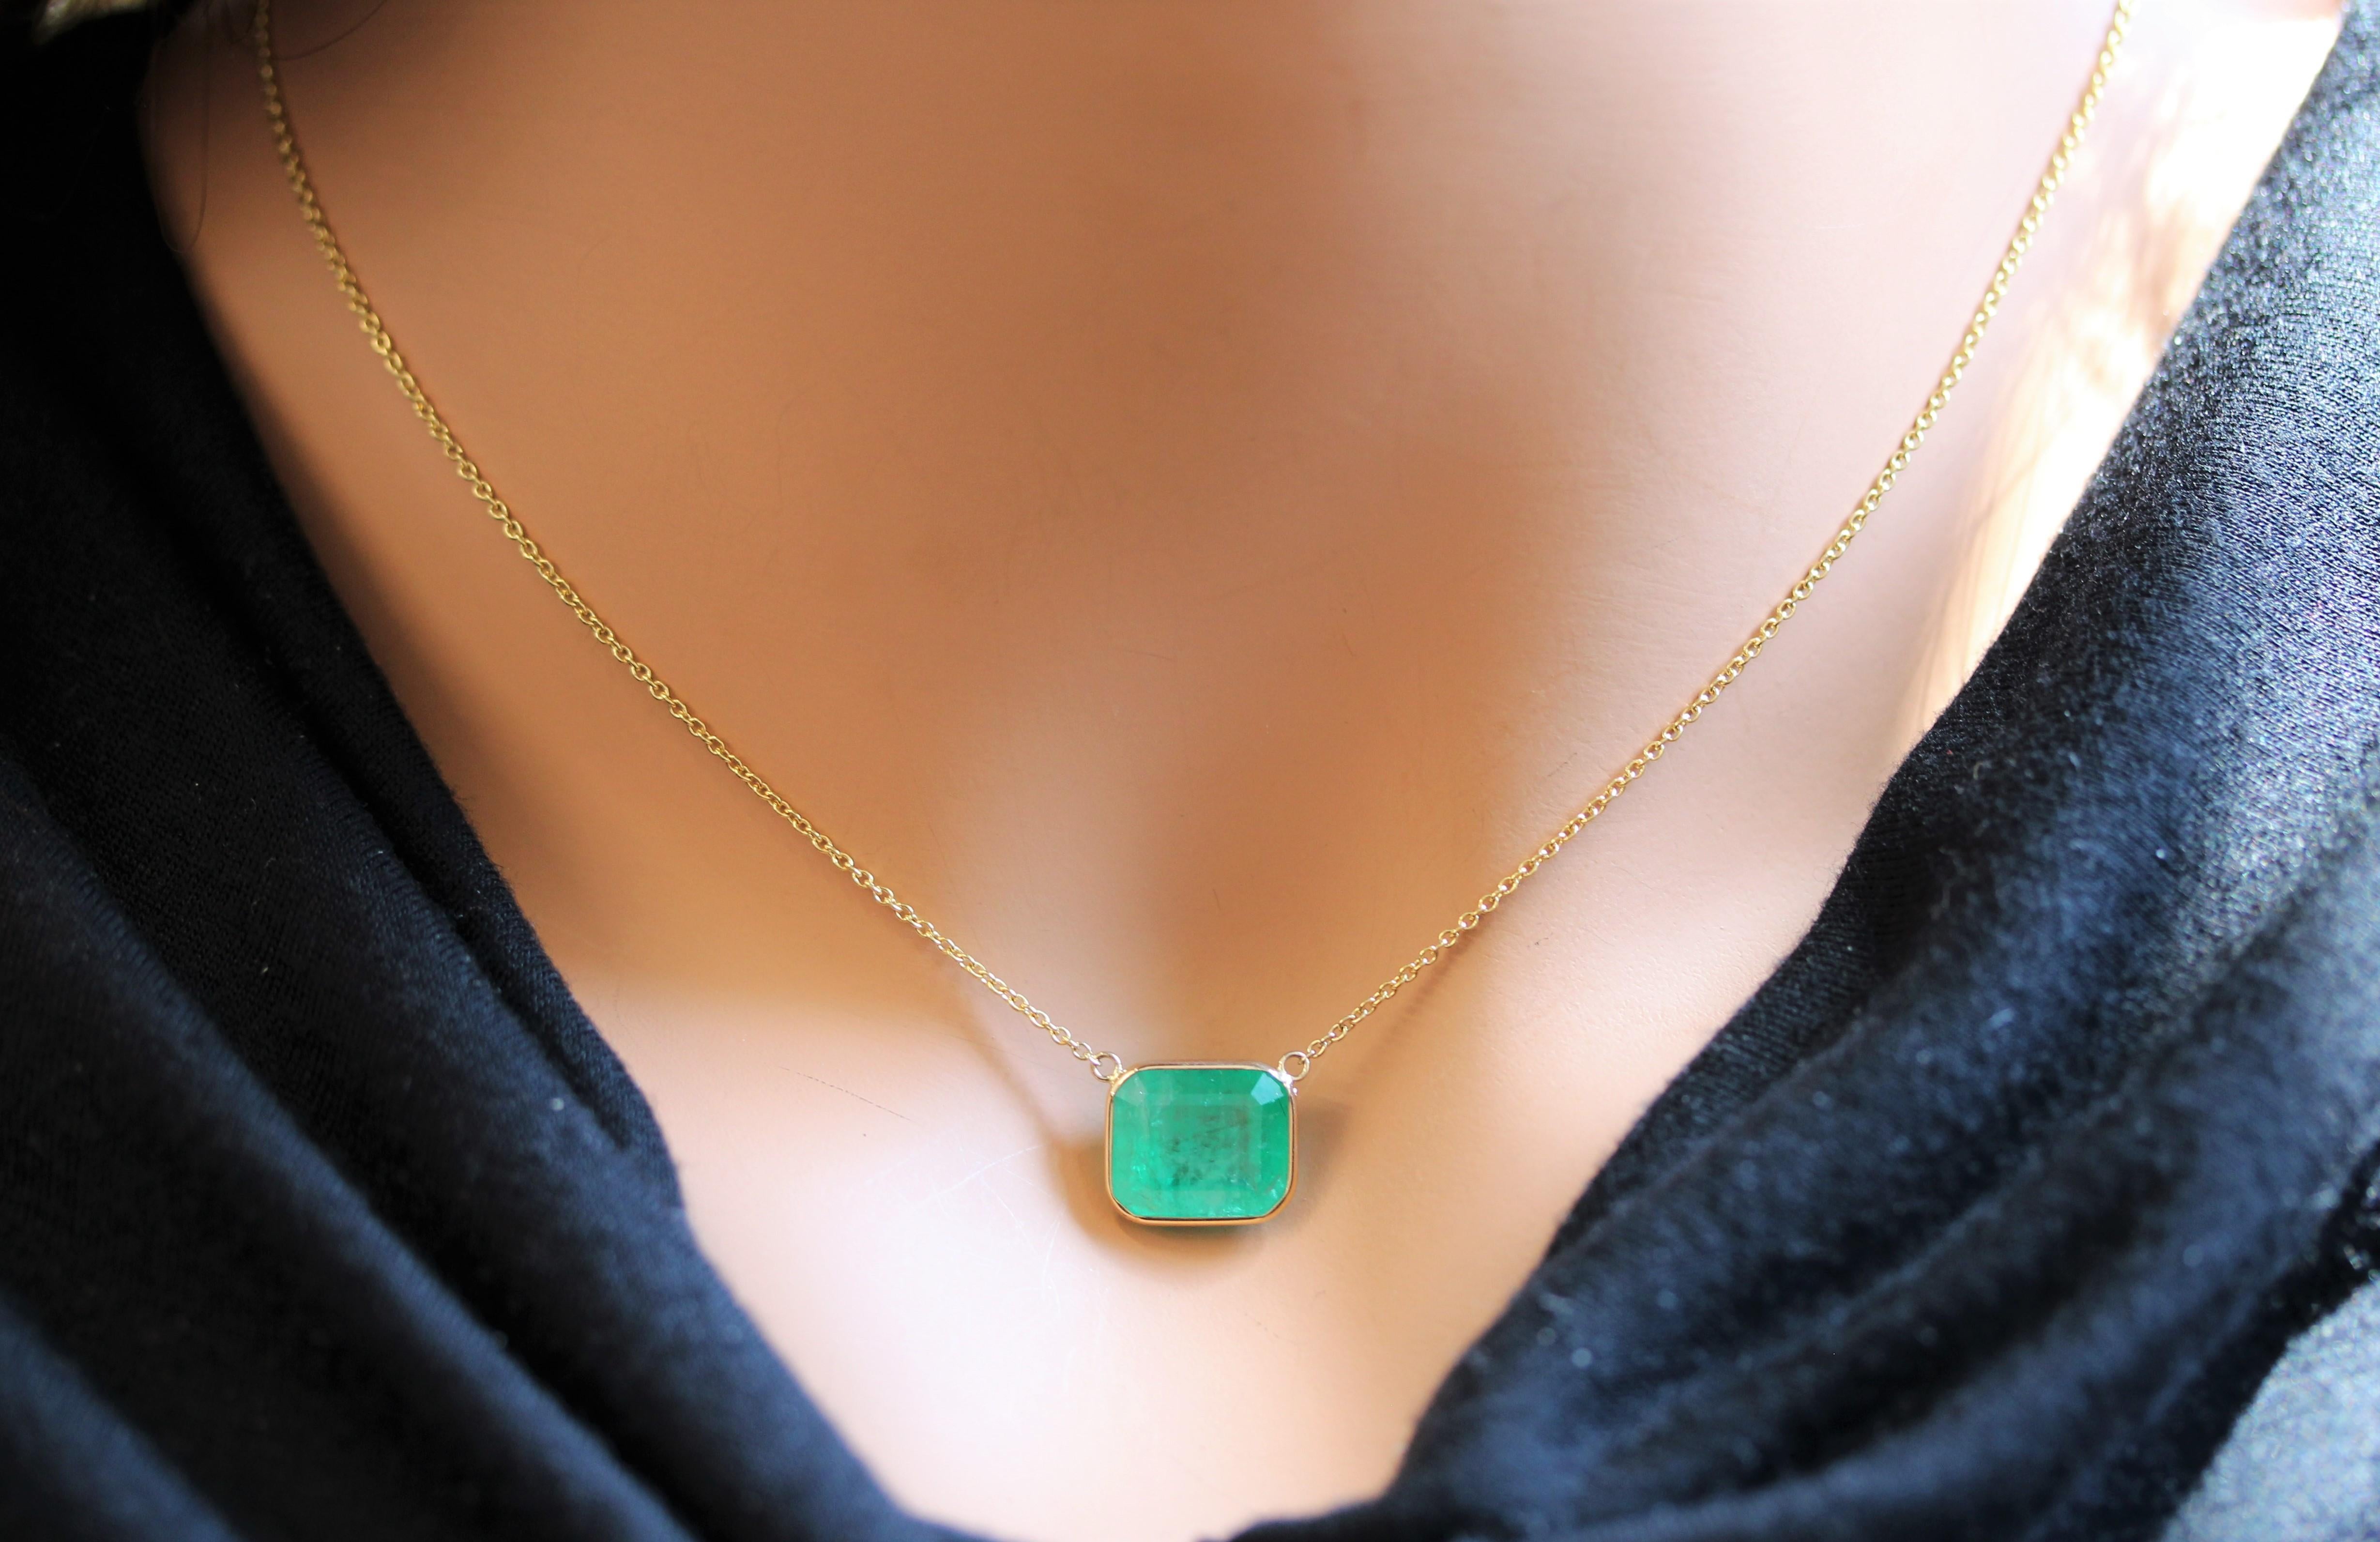 Emerald Cut 6.03 Carat Green Emerald Delicate Handmade Solitaire Necklace In 14k Yellow Gold For Sale